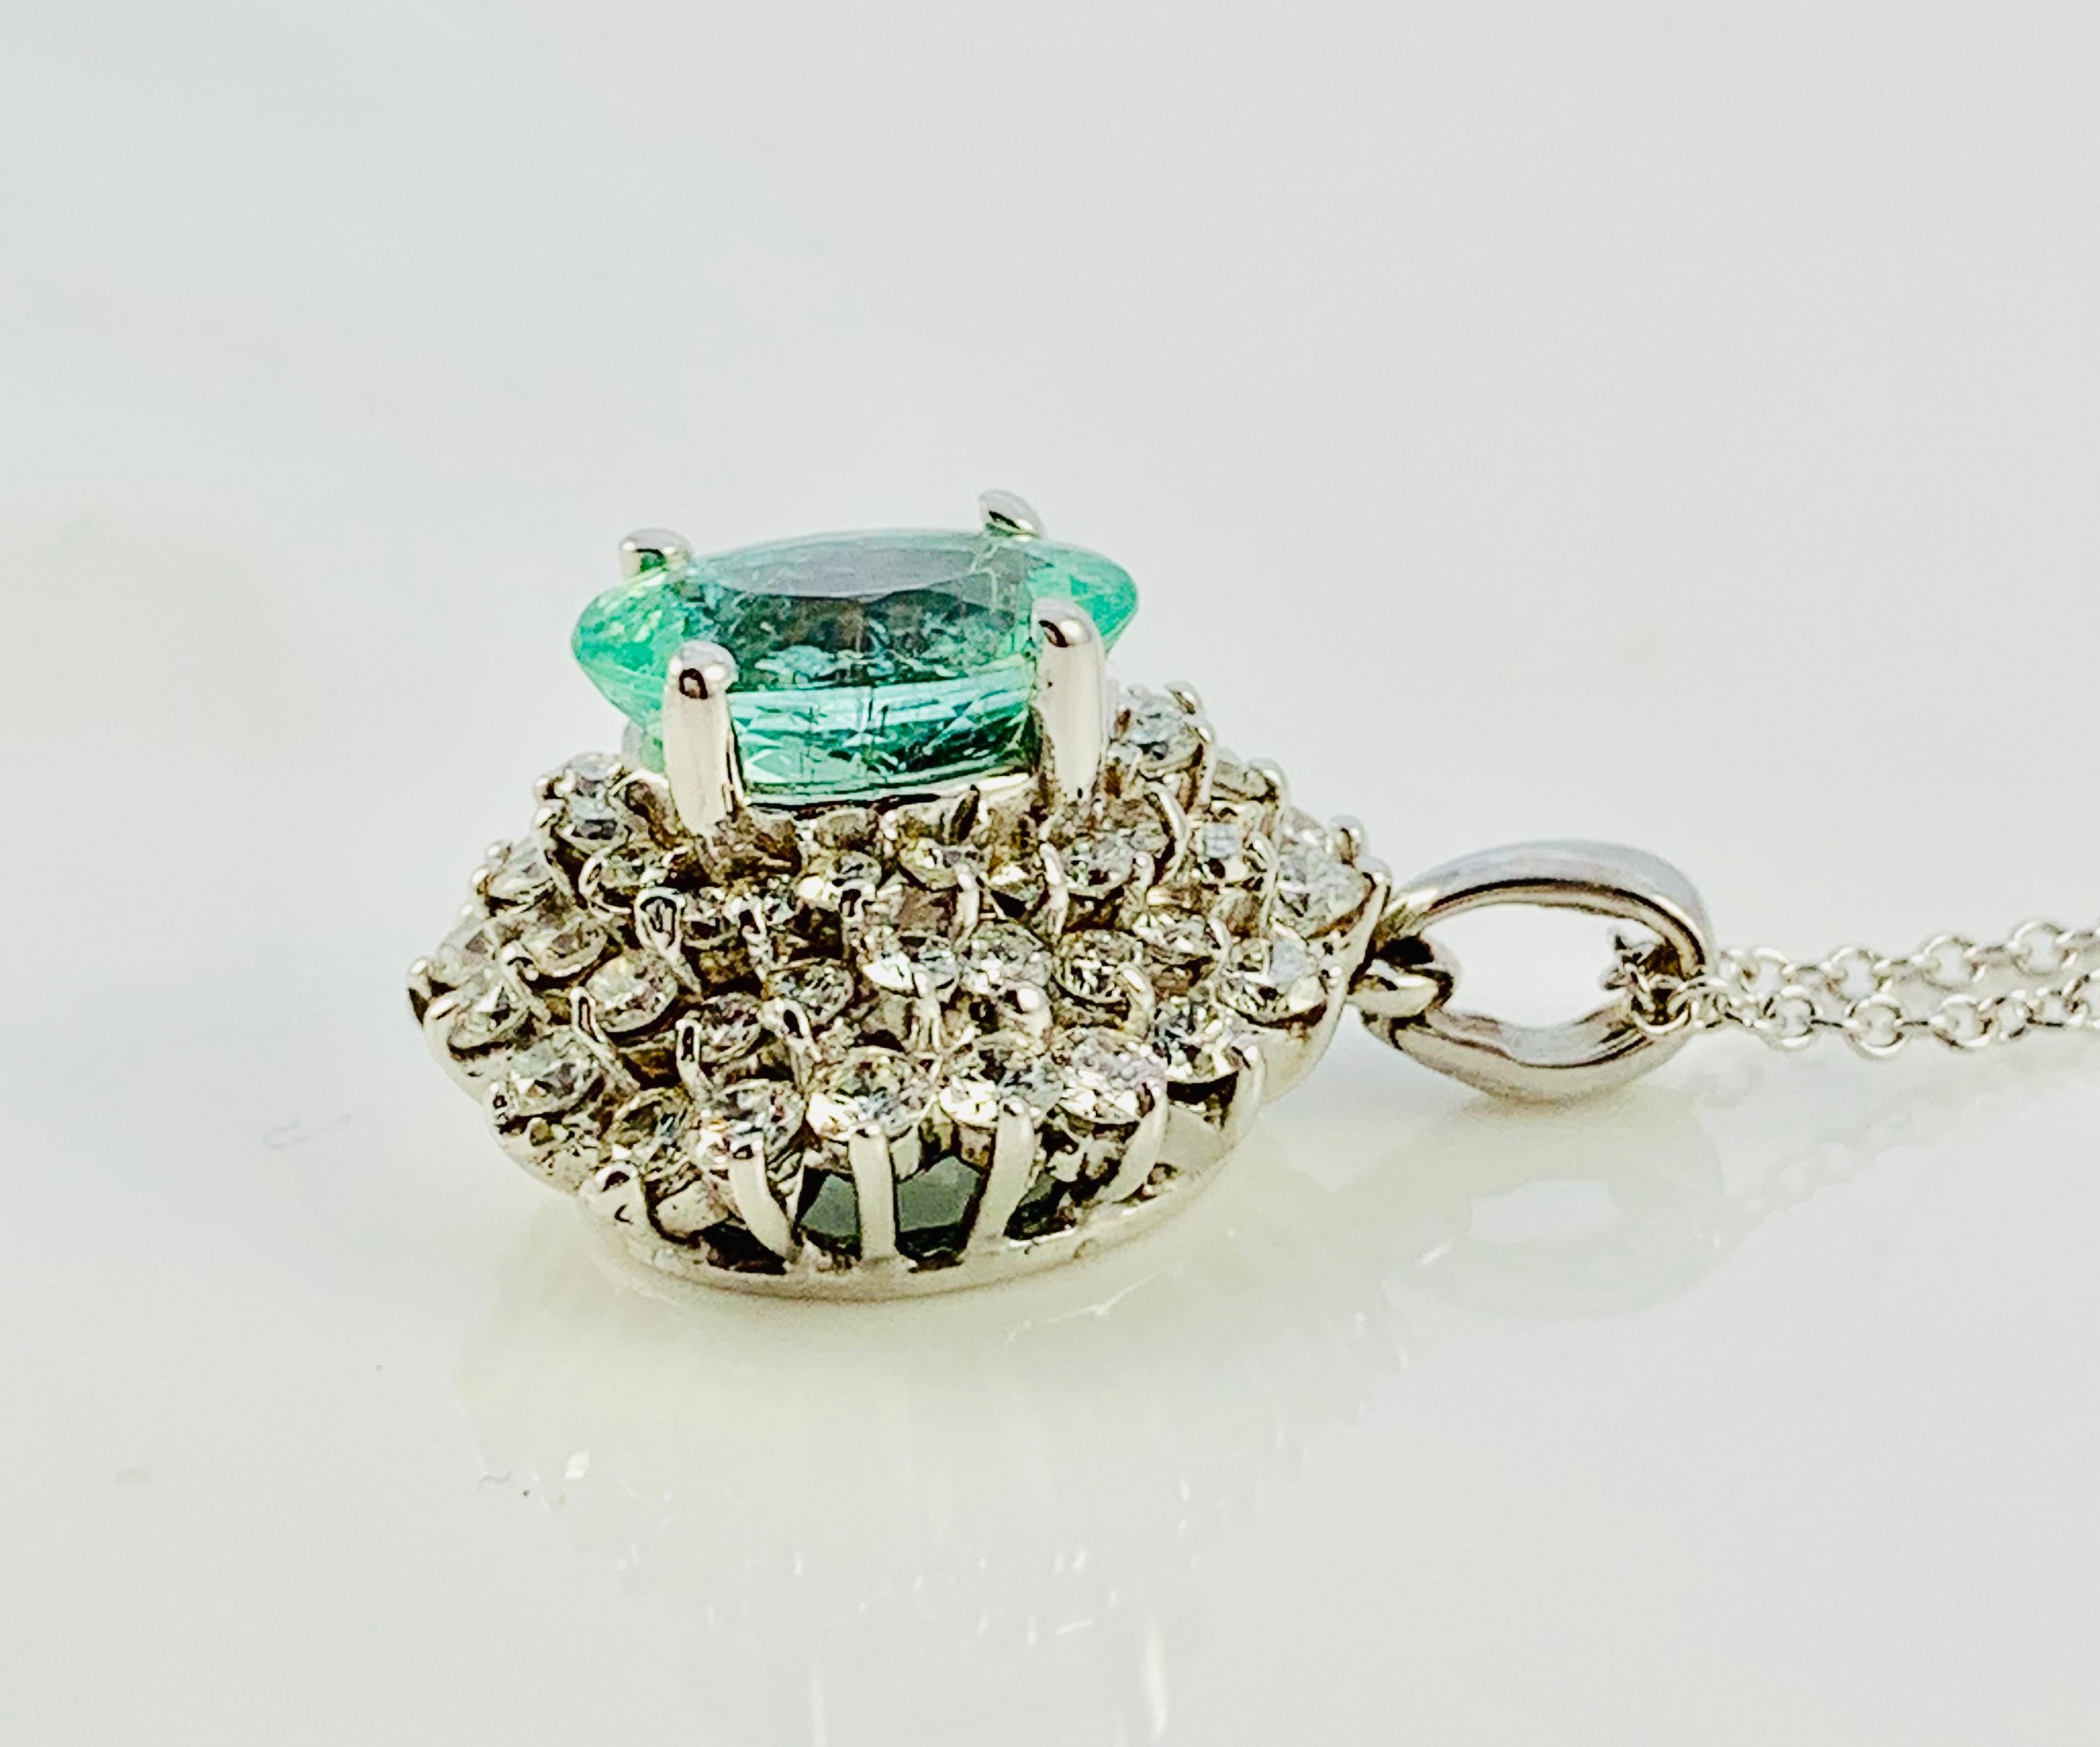 Absolutely Gorgeous Diamond and Paraiba Tourmaline Pendant Necklace. This pendant is made in 18K white gold. At the heart of this piece is a stunning 2.35 Carat Oval Paraiba Tourmaline that its surrounded by three rows of diamonds (20 per row). It